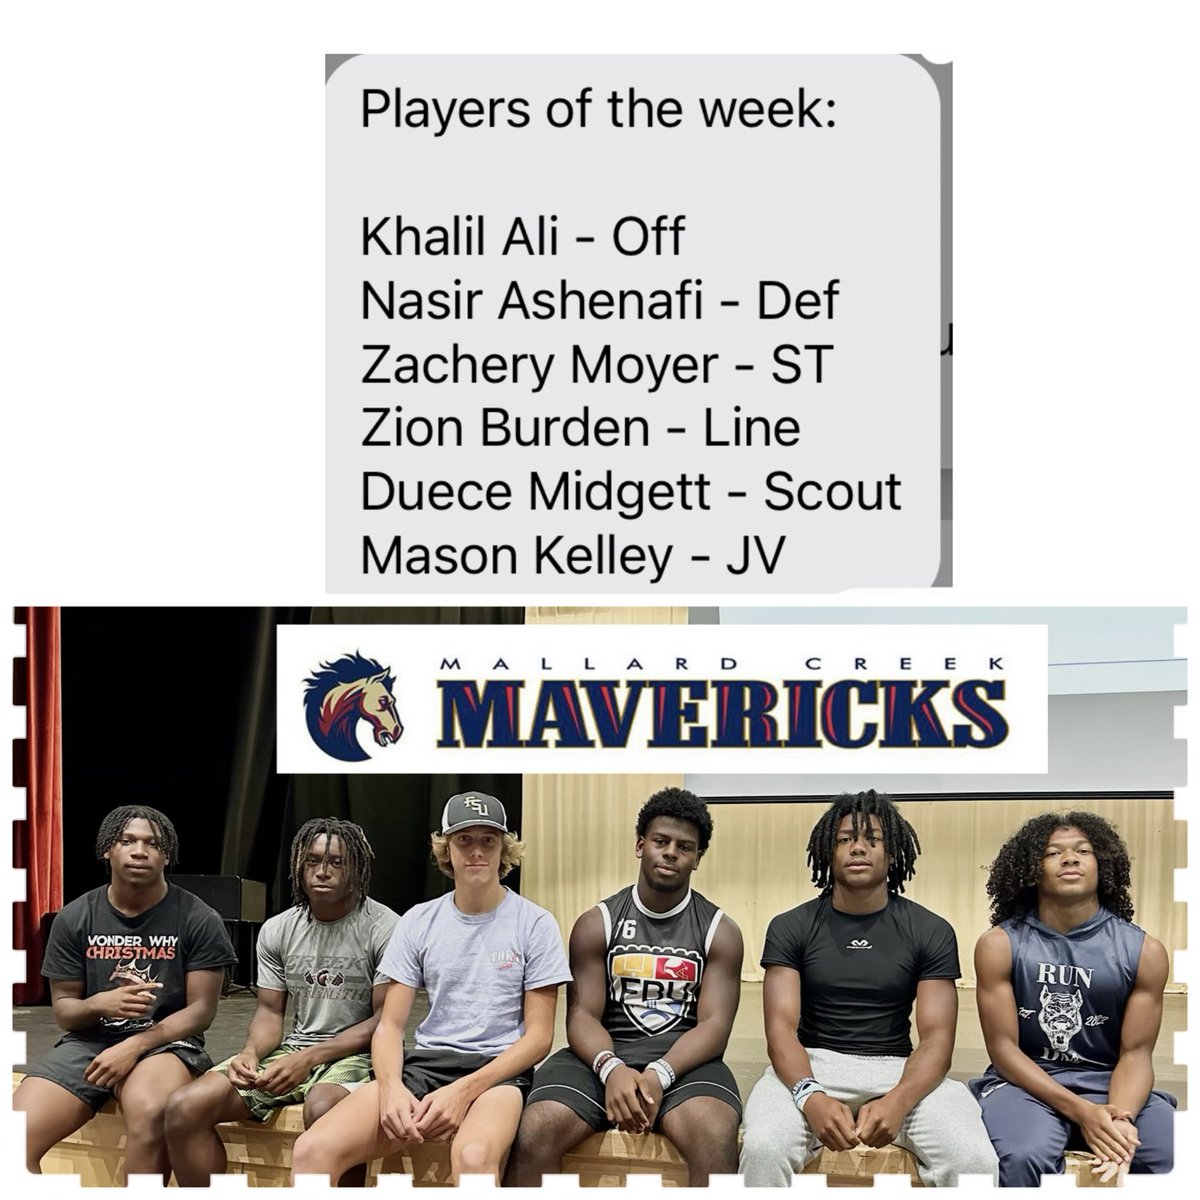 The Maverick players of the week